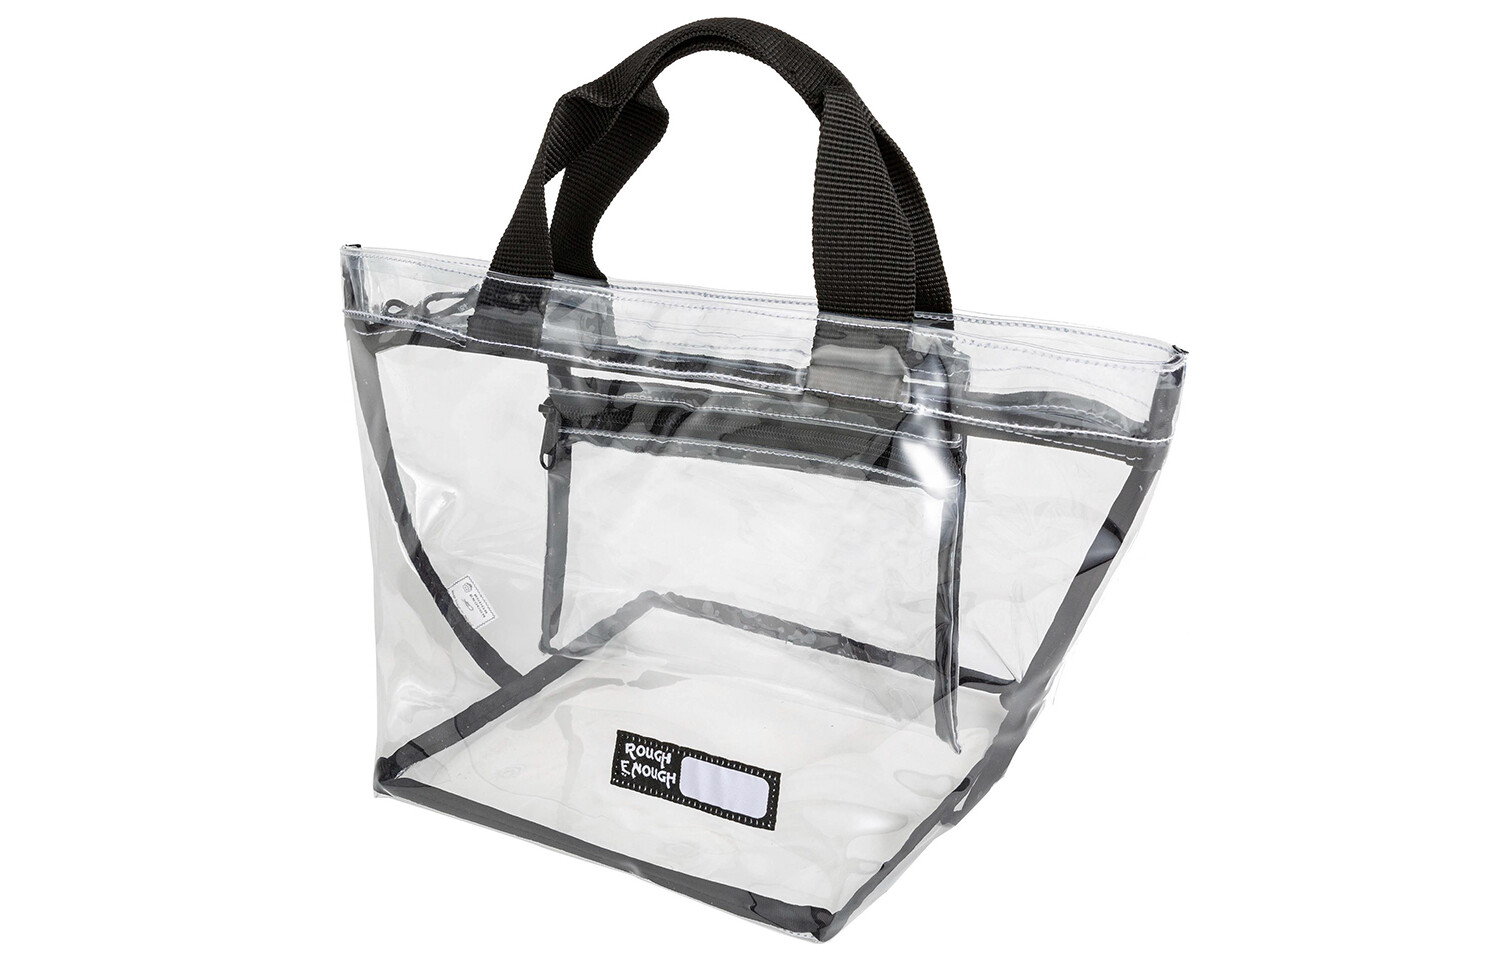 RE8485-Black Rough Enough Clear Bag Stadium Approved for Women and Girls,Clear Handbag with Zipper,Concert Bag